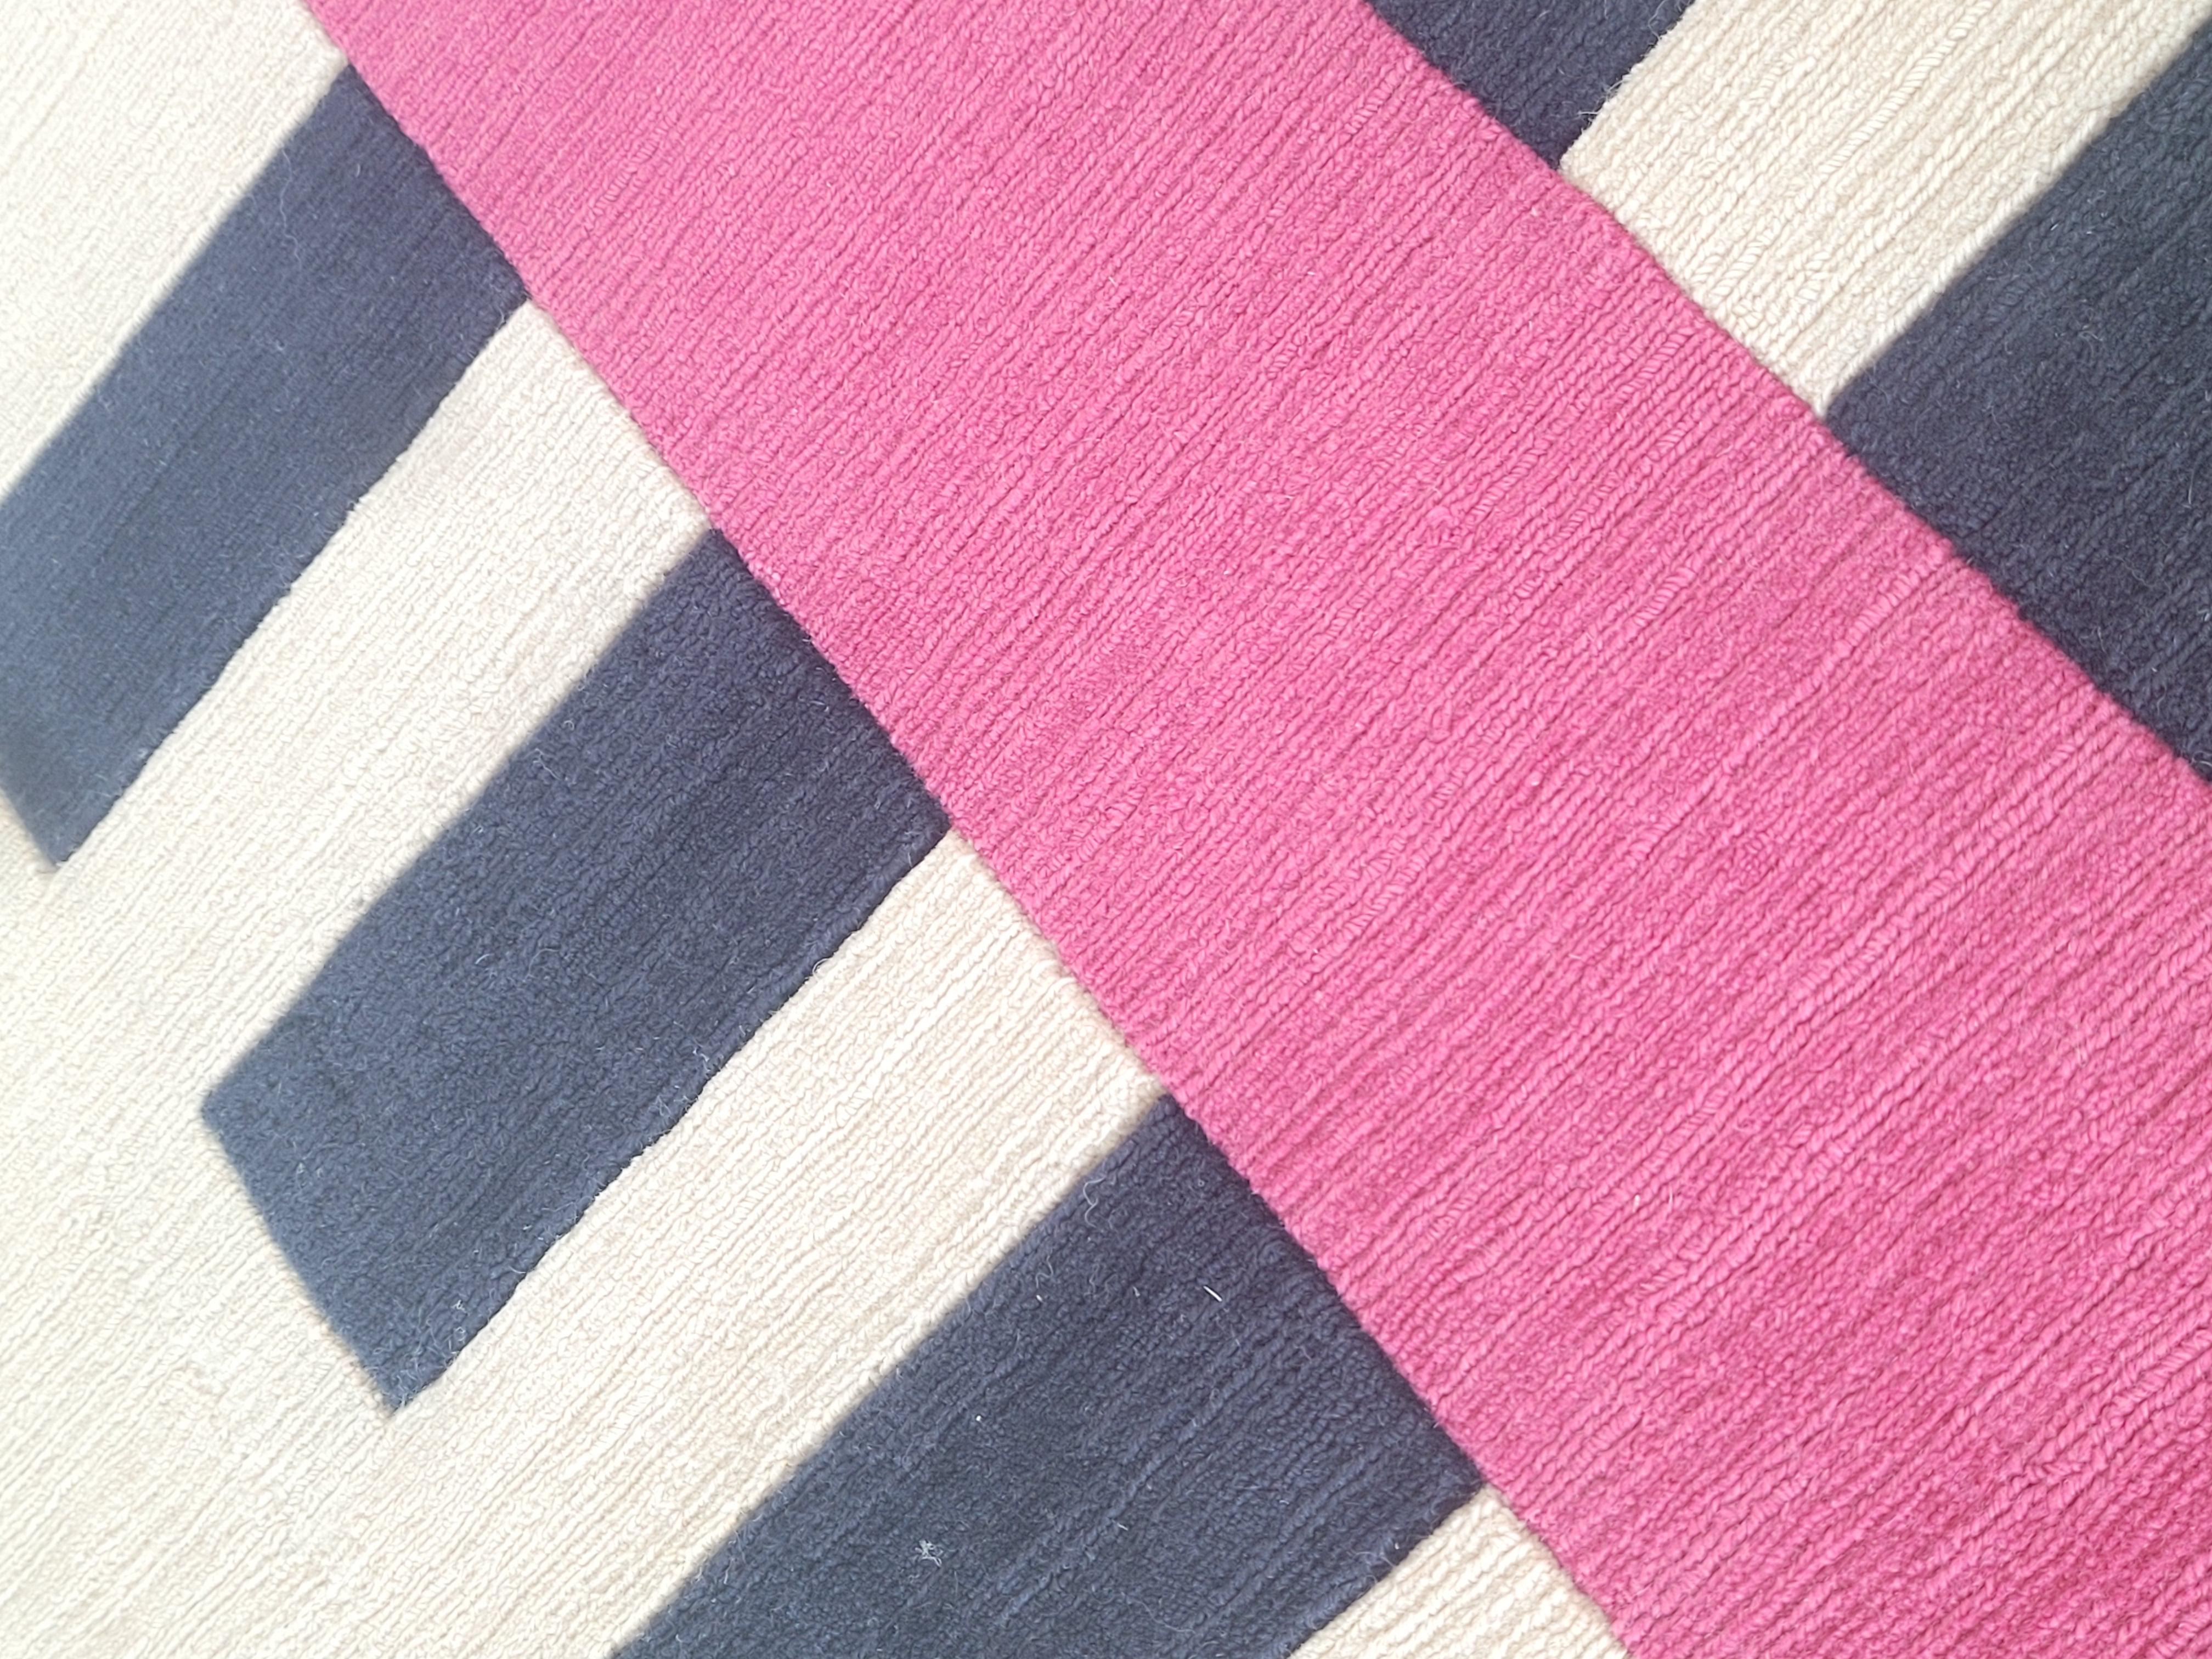 this carpet is woven on a hand/loom in a technique called 'tip shear' which gives a beautiful texture and a soft feeling on the surface.
 The surface is a mix of loops and cut yarn, that gives a shimmering look. The design is inspired by boxes in